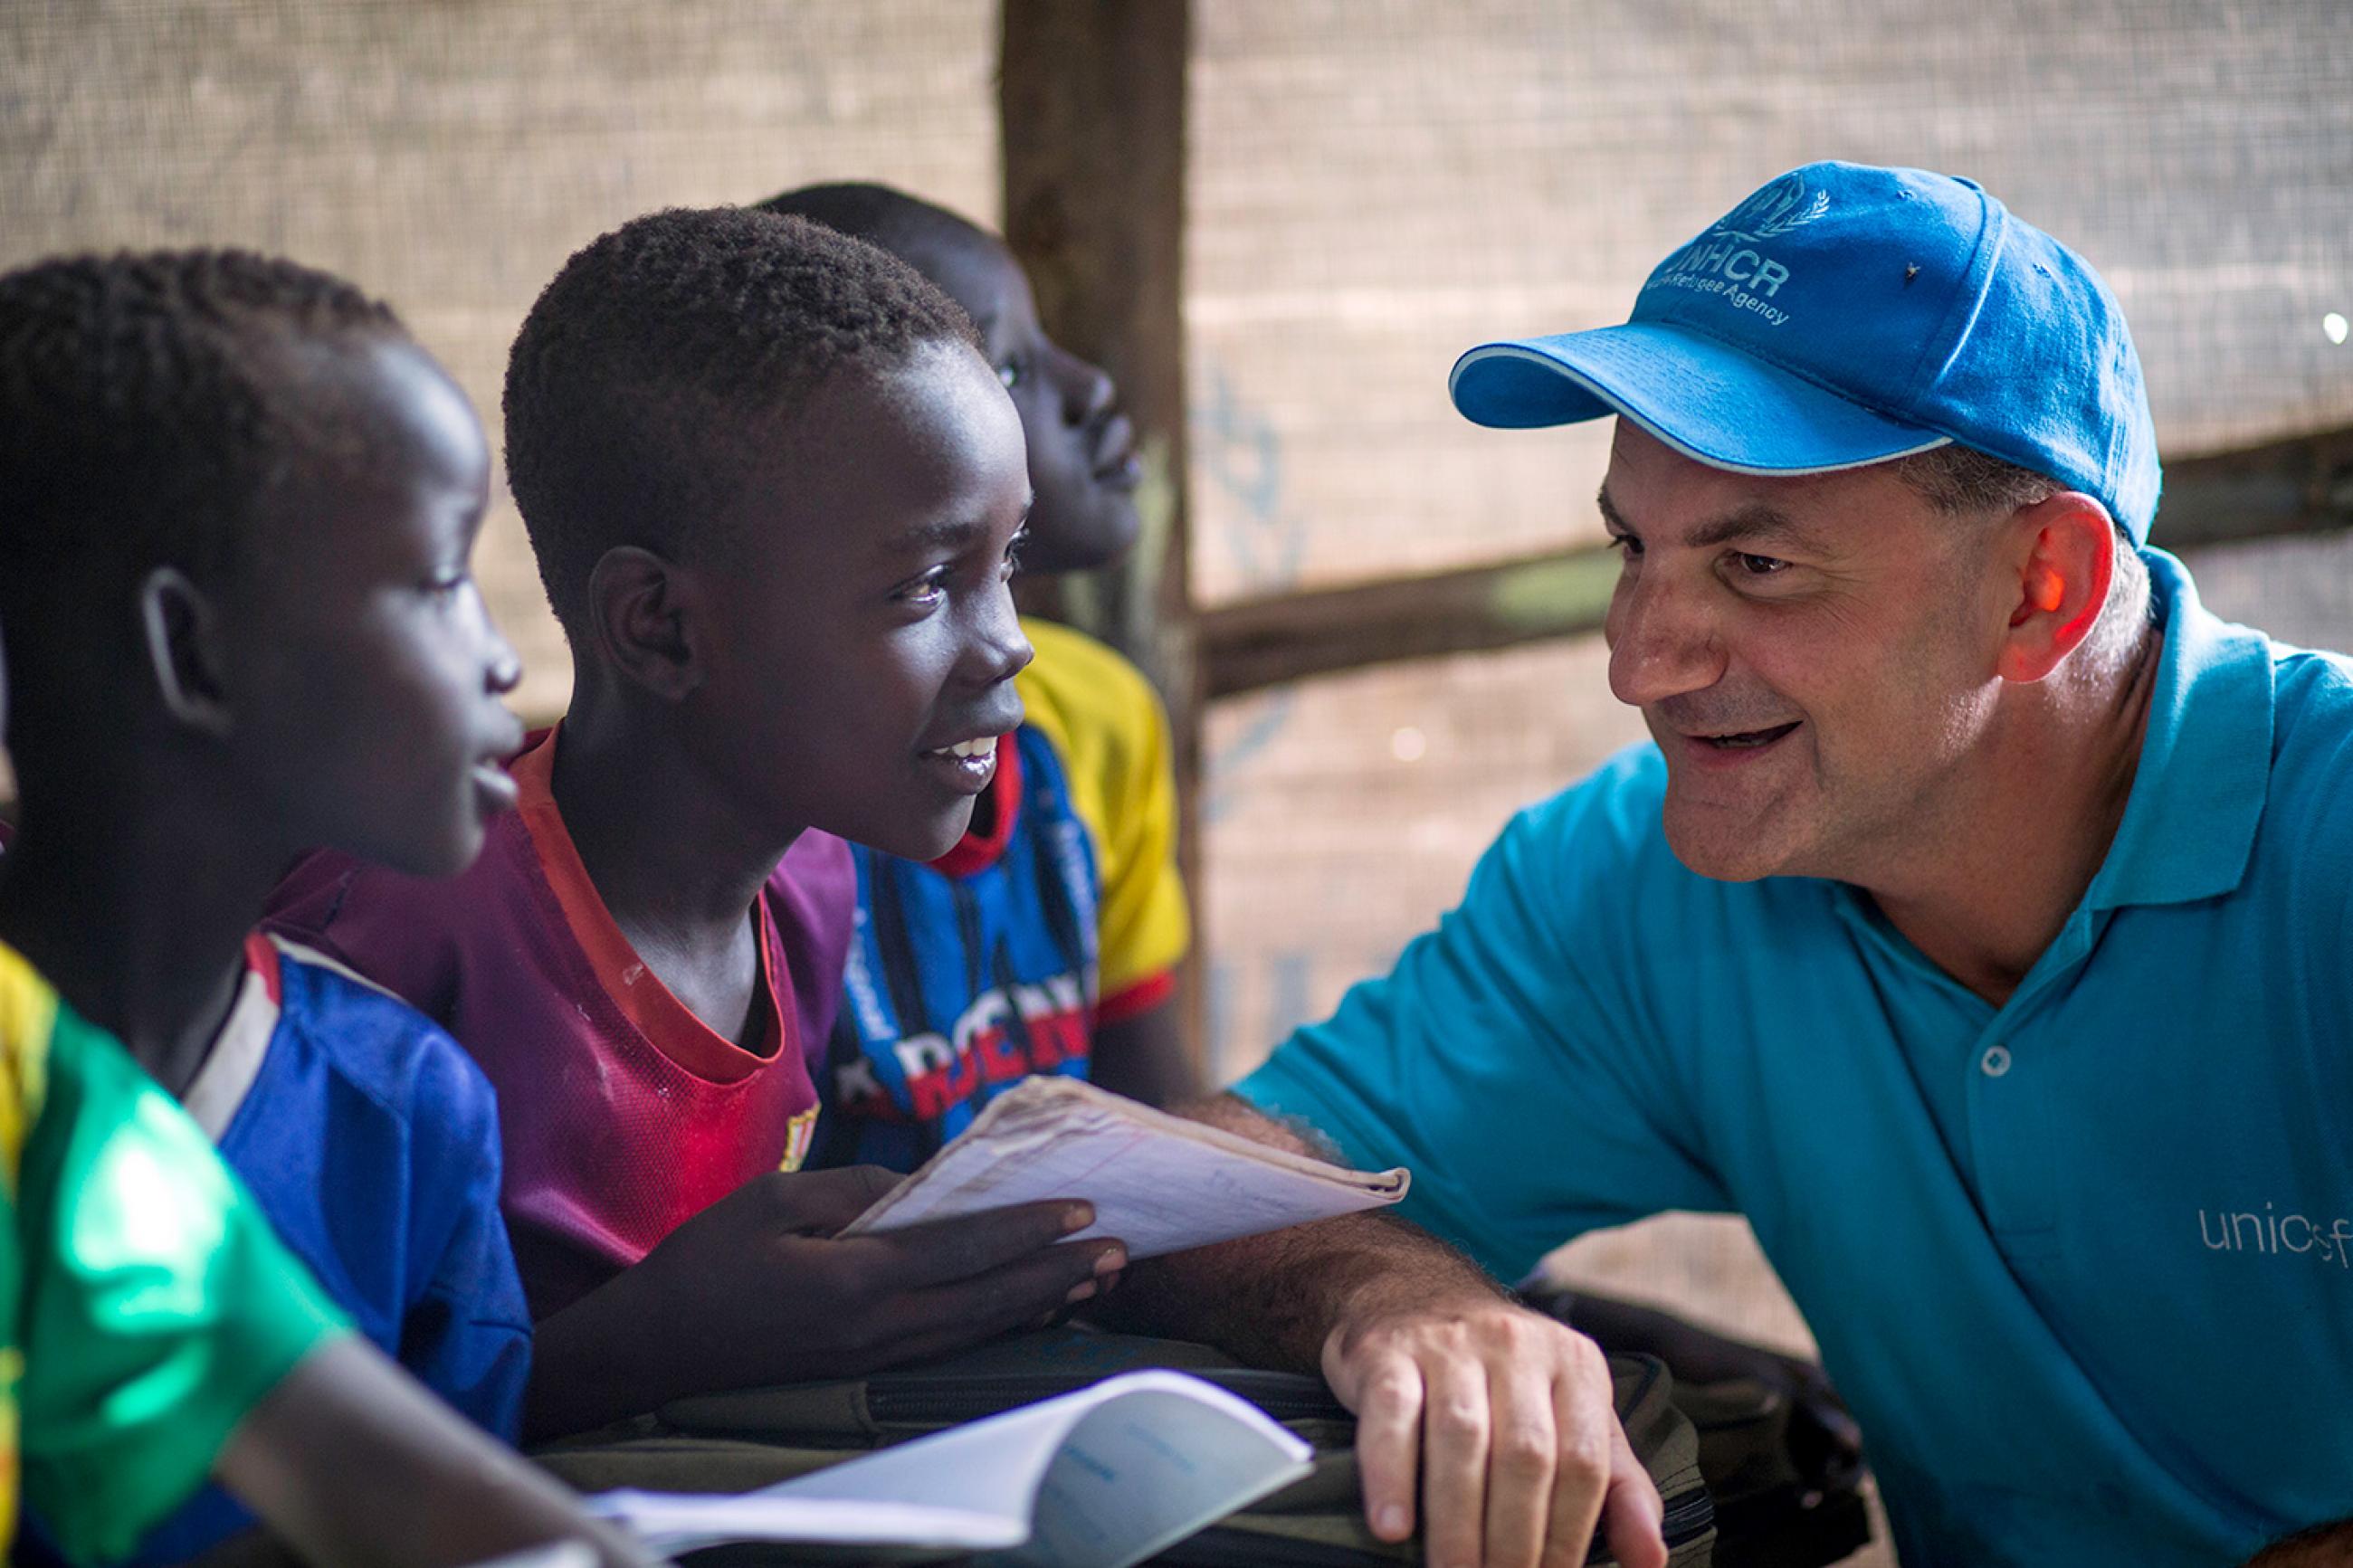 Peter Salama visits a makeshift school at Kule Camp in the Gambella region of Ethiopia on August 12, 2014, when he was the Country Representative of UNICEF Ethiopia. Picture shows Dr. Salama wearing a blue hat talking to several boys in a classroom. They are all smiling. UNICEF/Jiro Ose/UNI170605